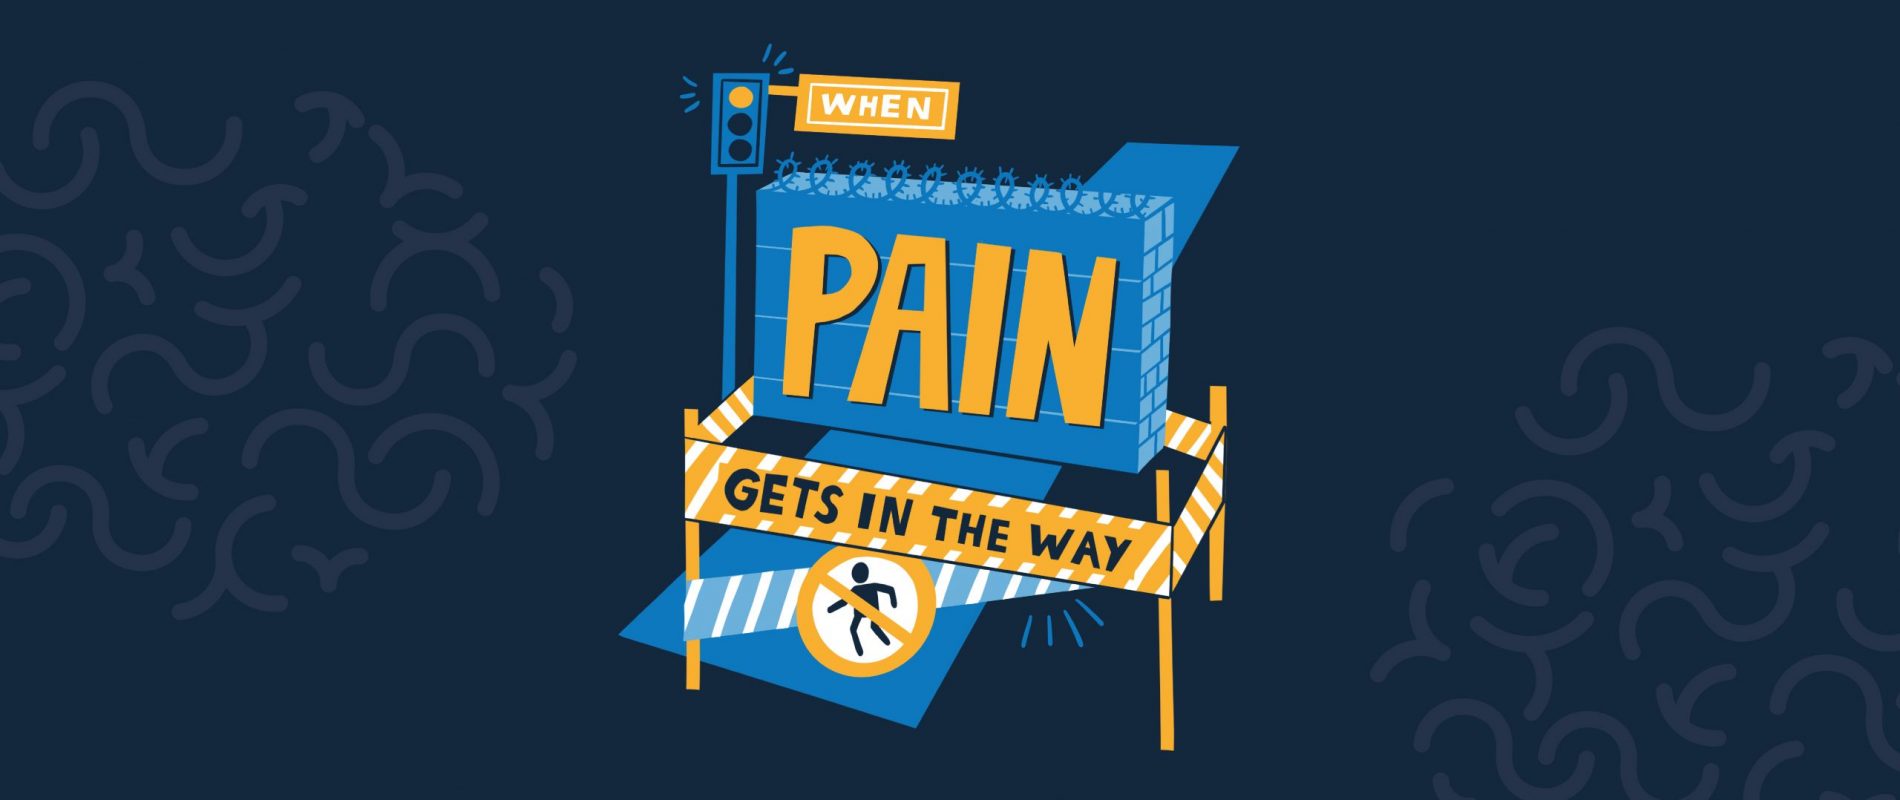 pain in the way event